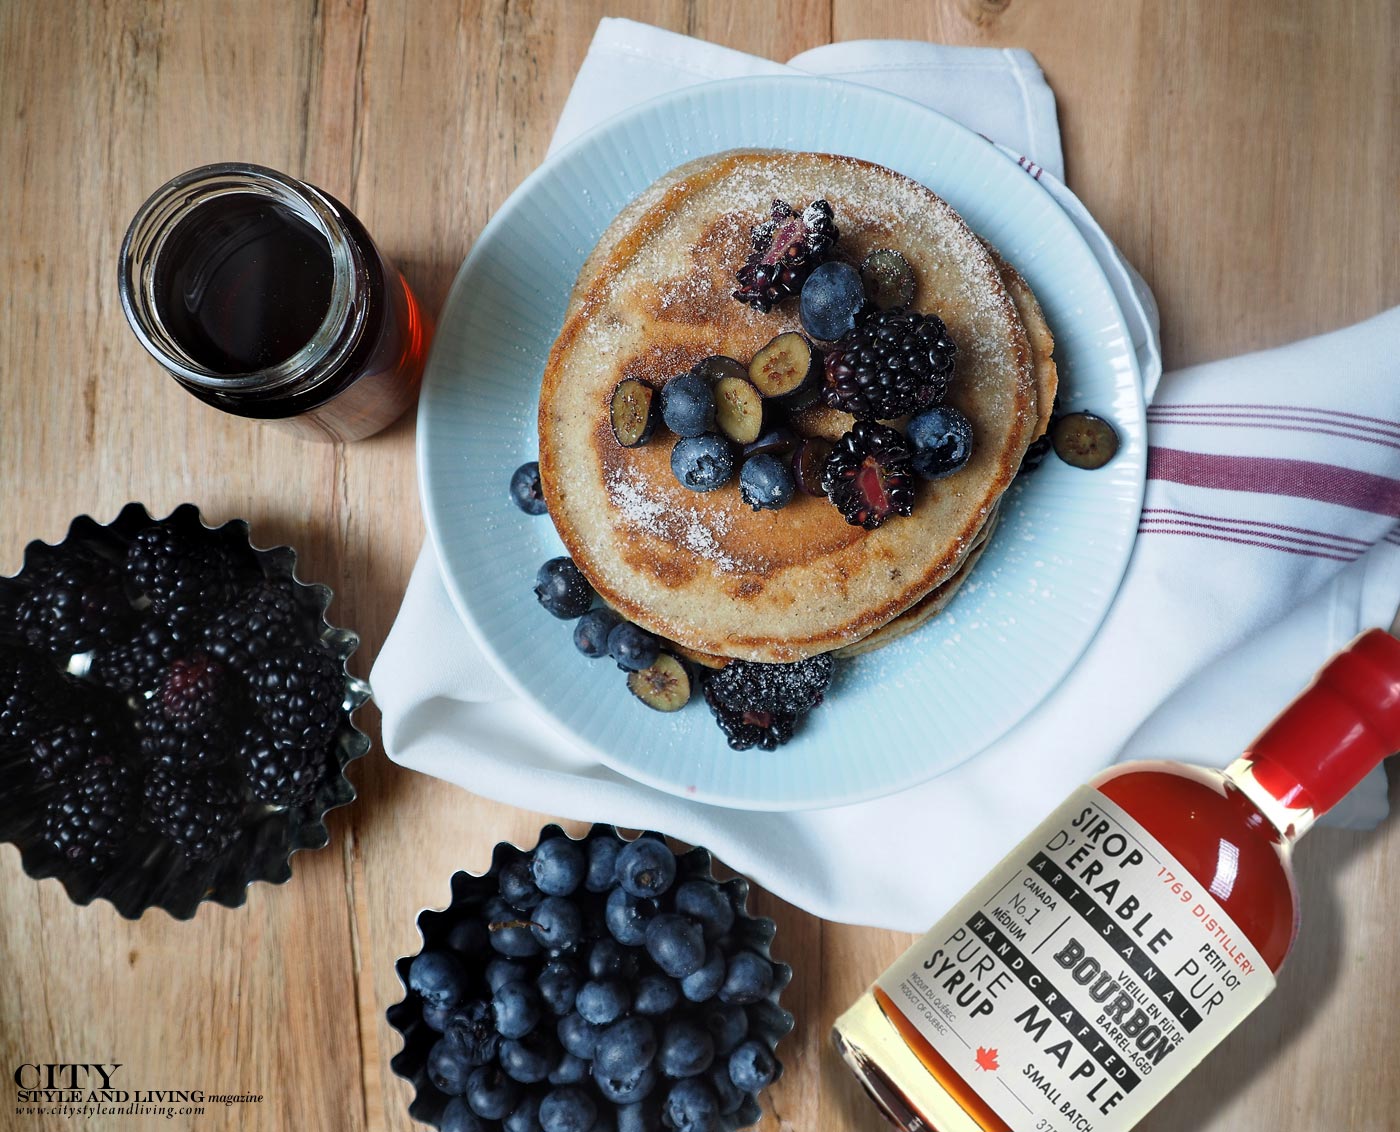 City Style and Living Magazine Nunweilers Pancake Mix recipe and 1769 Distillery 